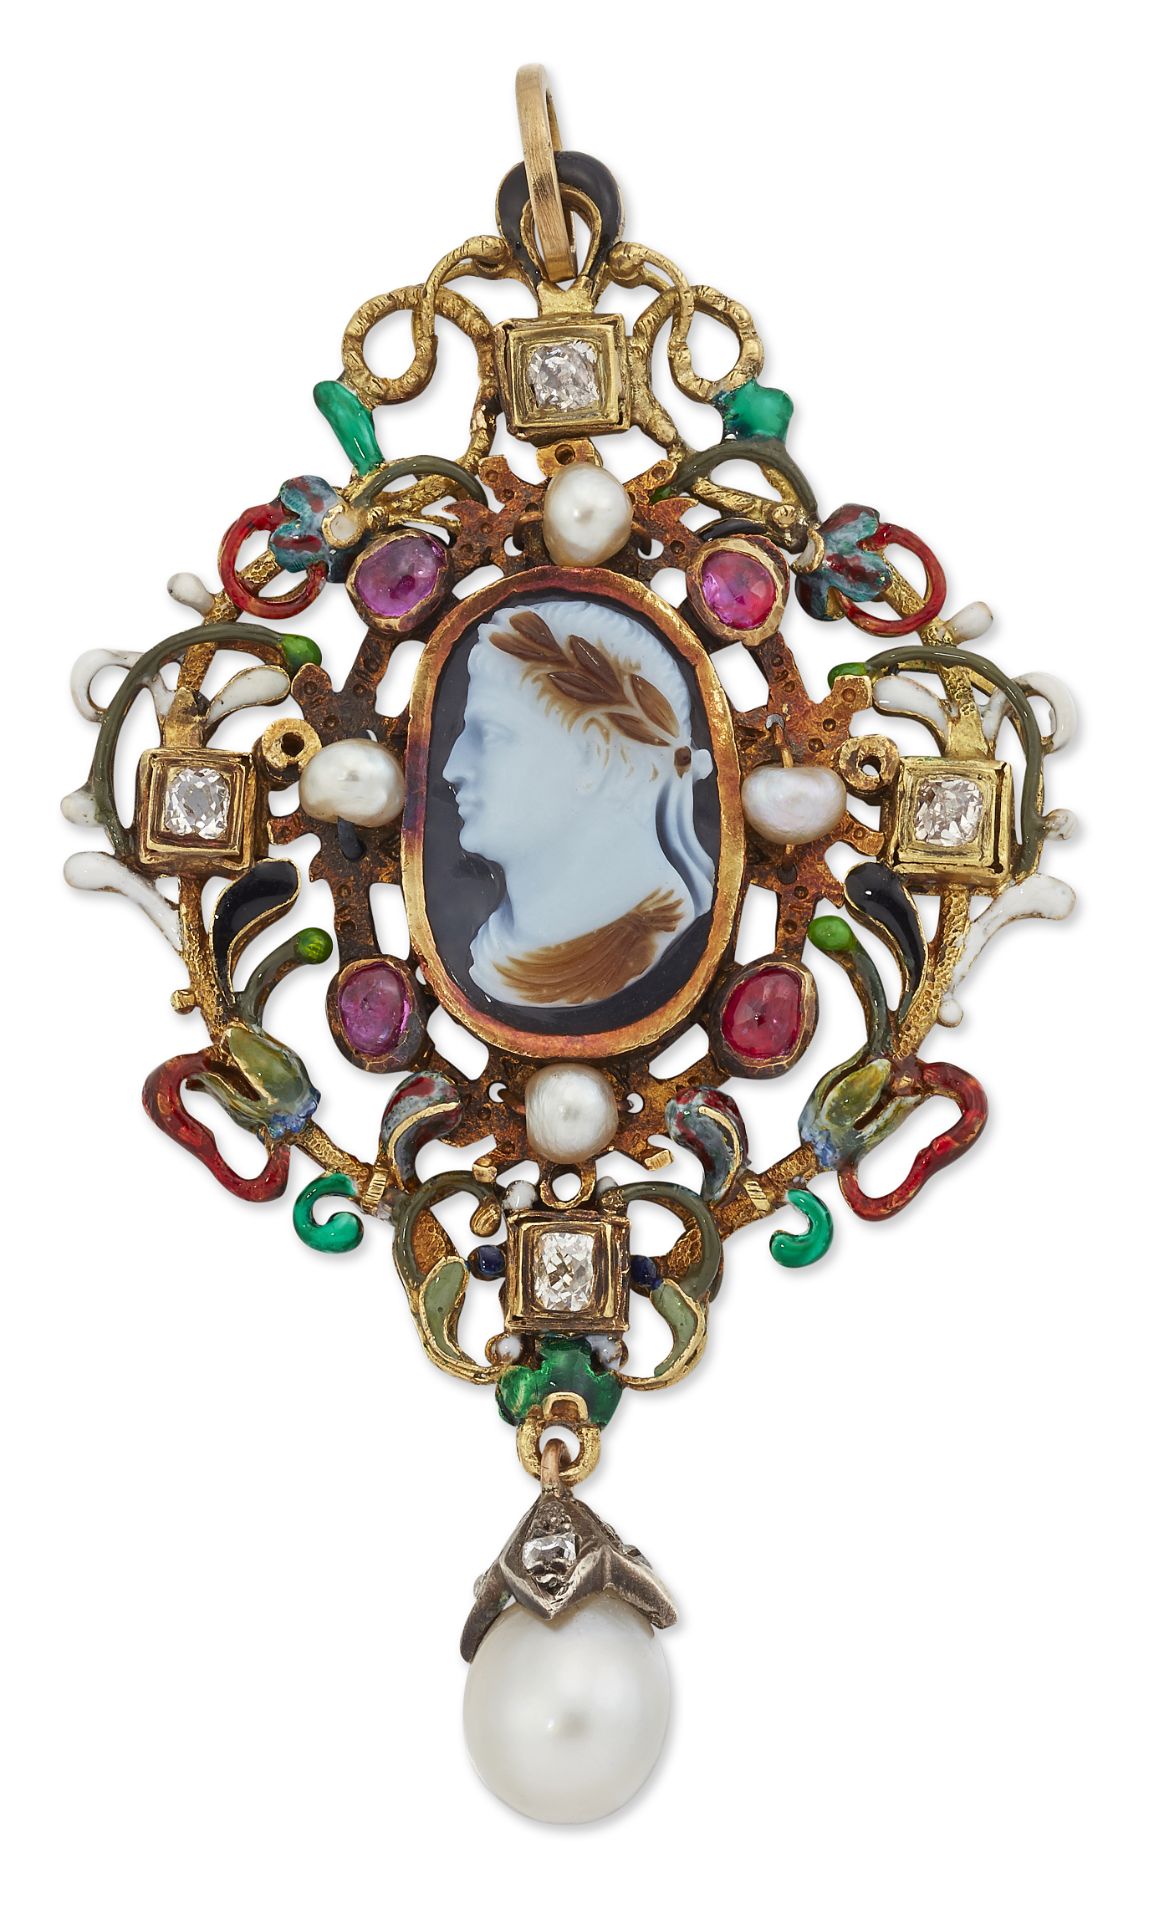 A FRENCH COMMESSO HARDSTONE CAMEO AND GEM-SET PENDANT